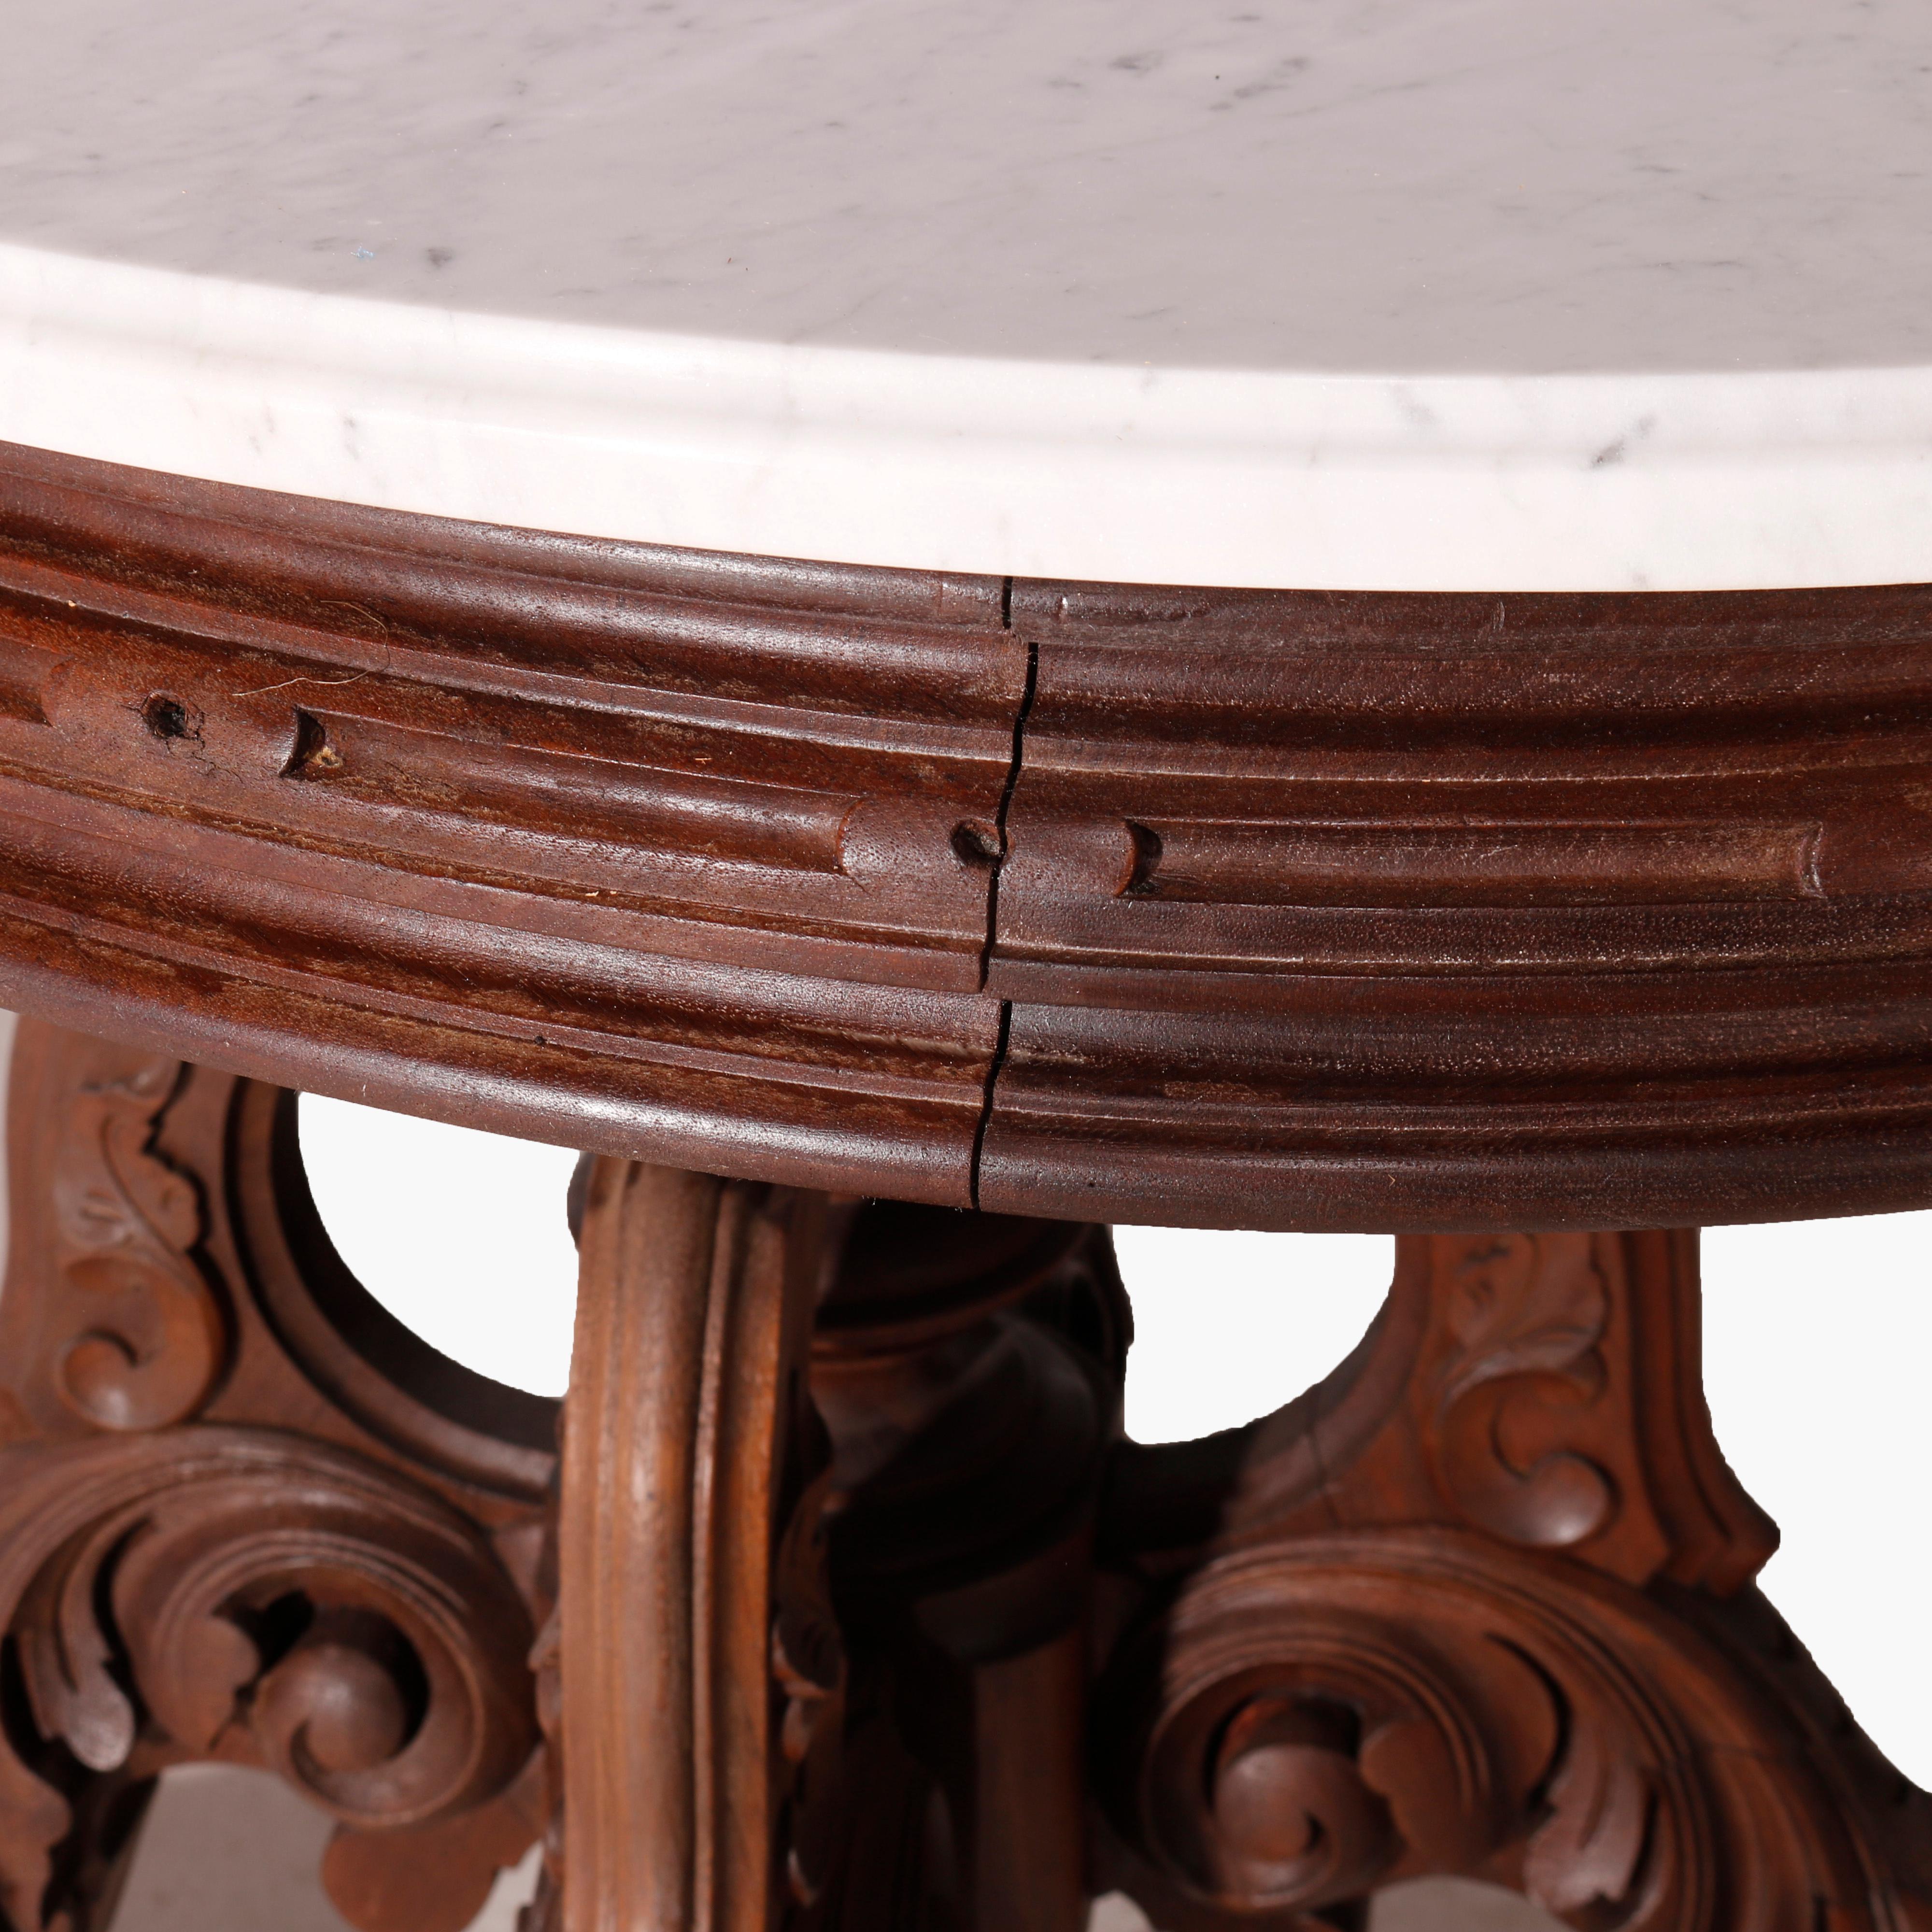 19th Century Oversized Antique Victorian Walnut Brooks Oval Marble Top Parlor Table 1890 For Sale